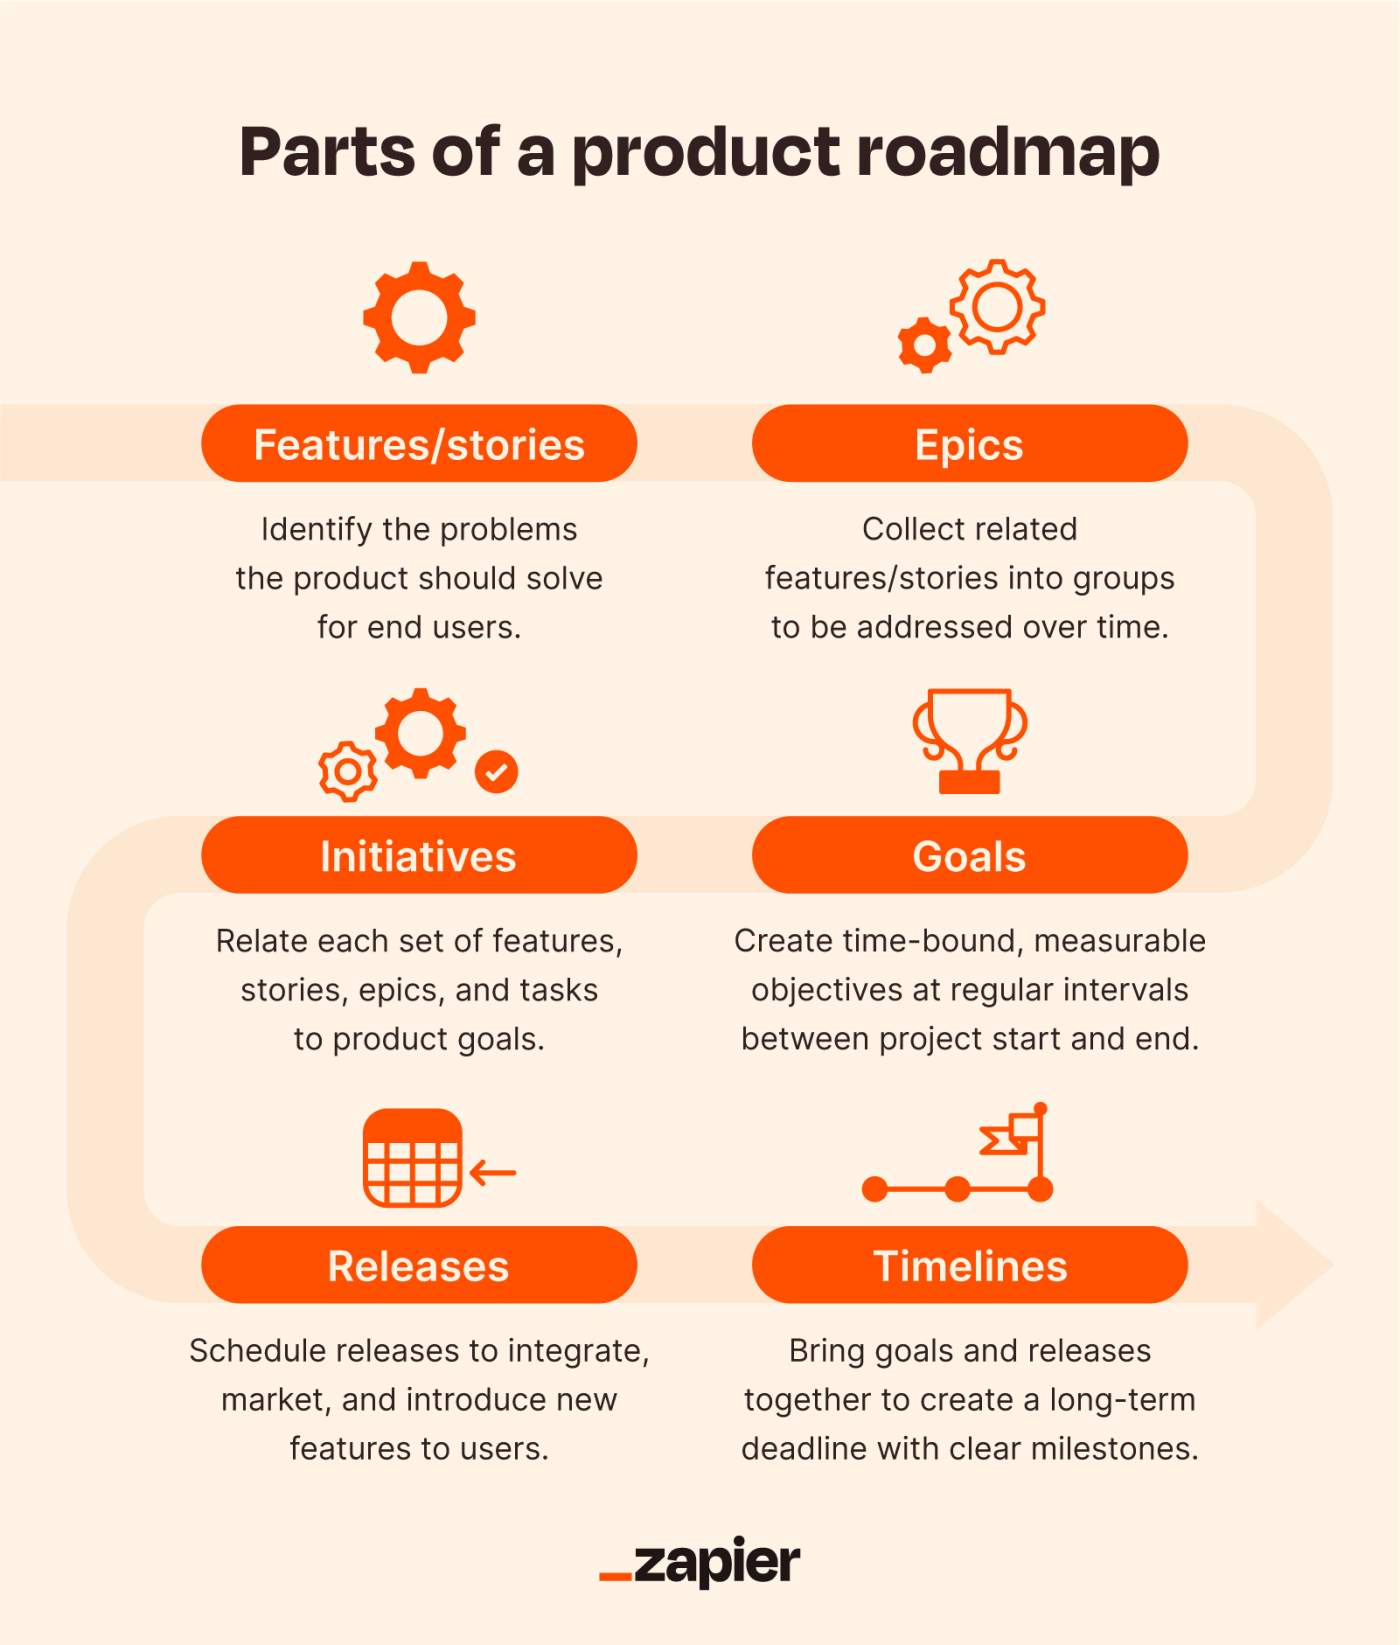 Illustrations of widgets, calendars and timelines representing the parts of a product roadmap 